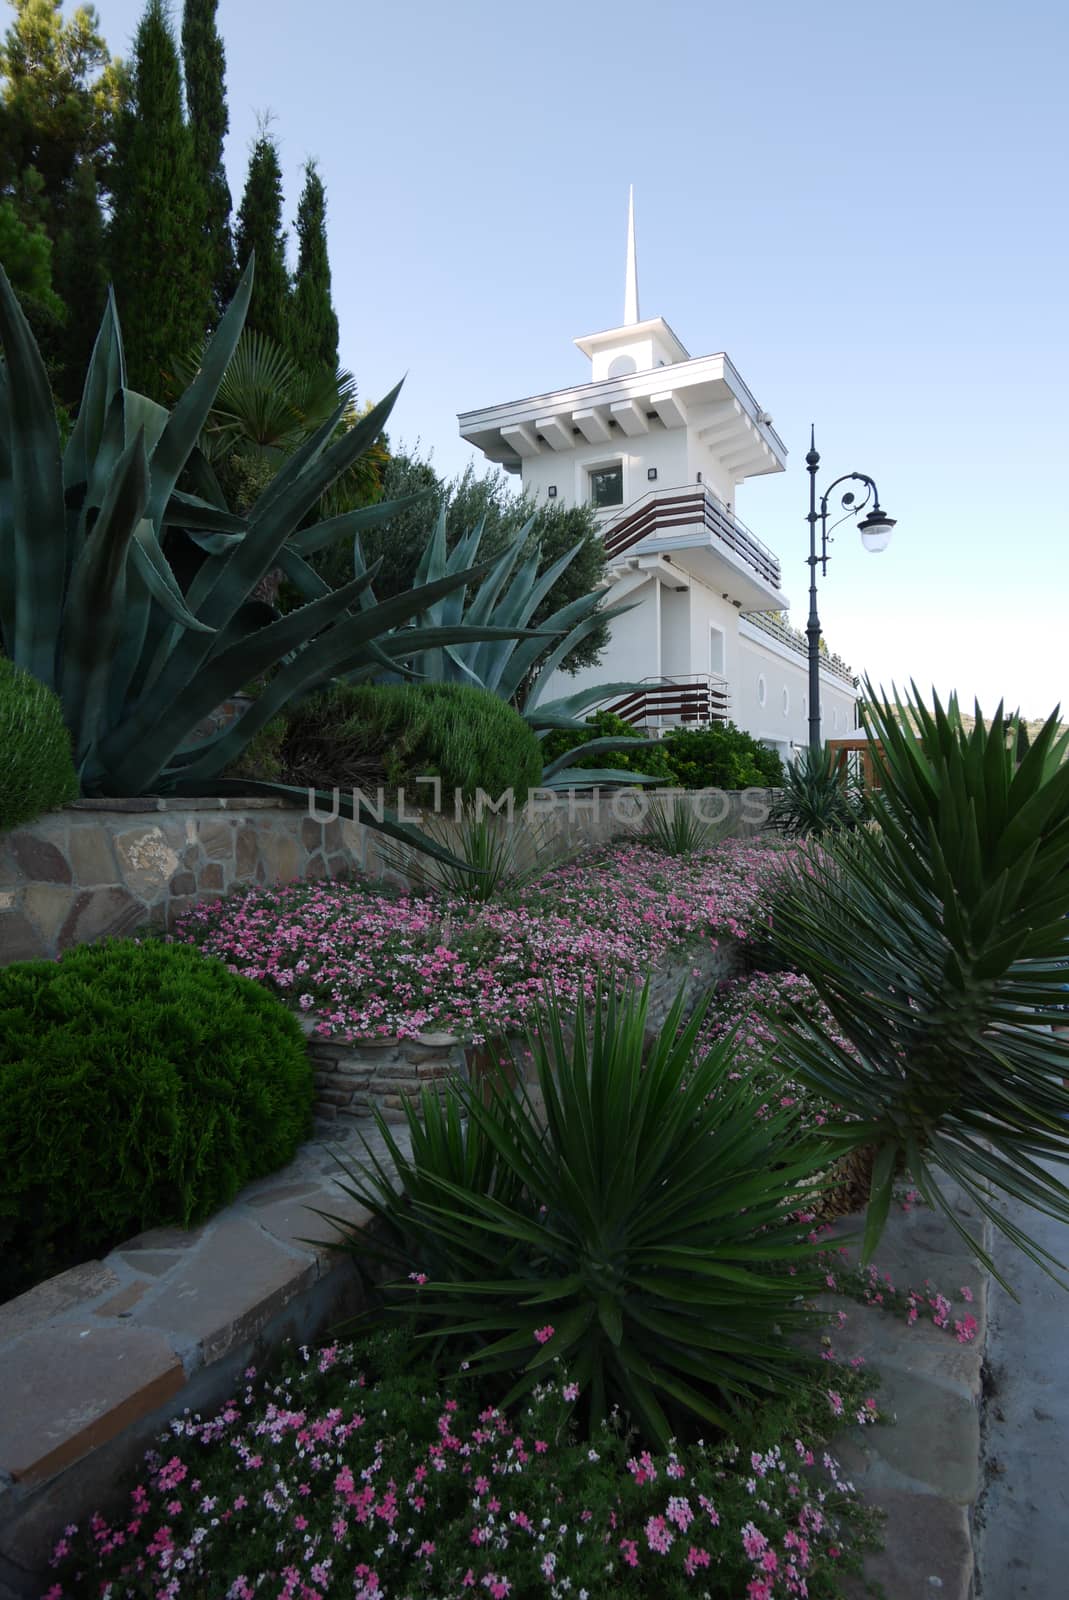 A view from below with a flower bed with flowers on a white building with a peak roof